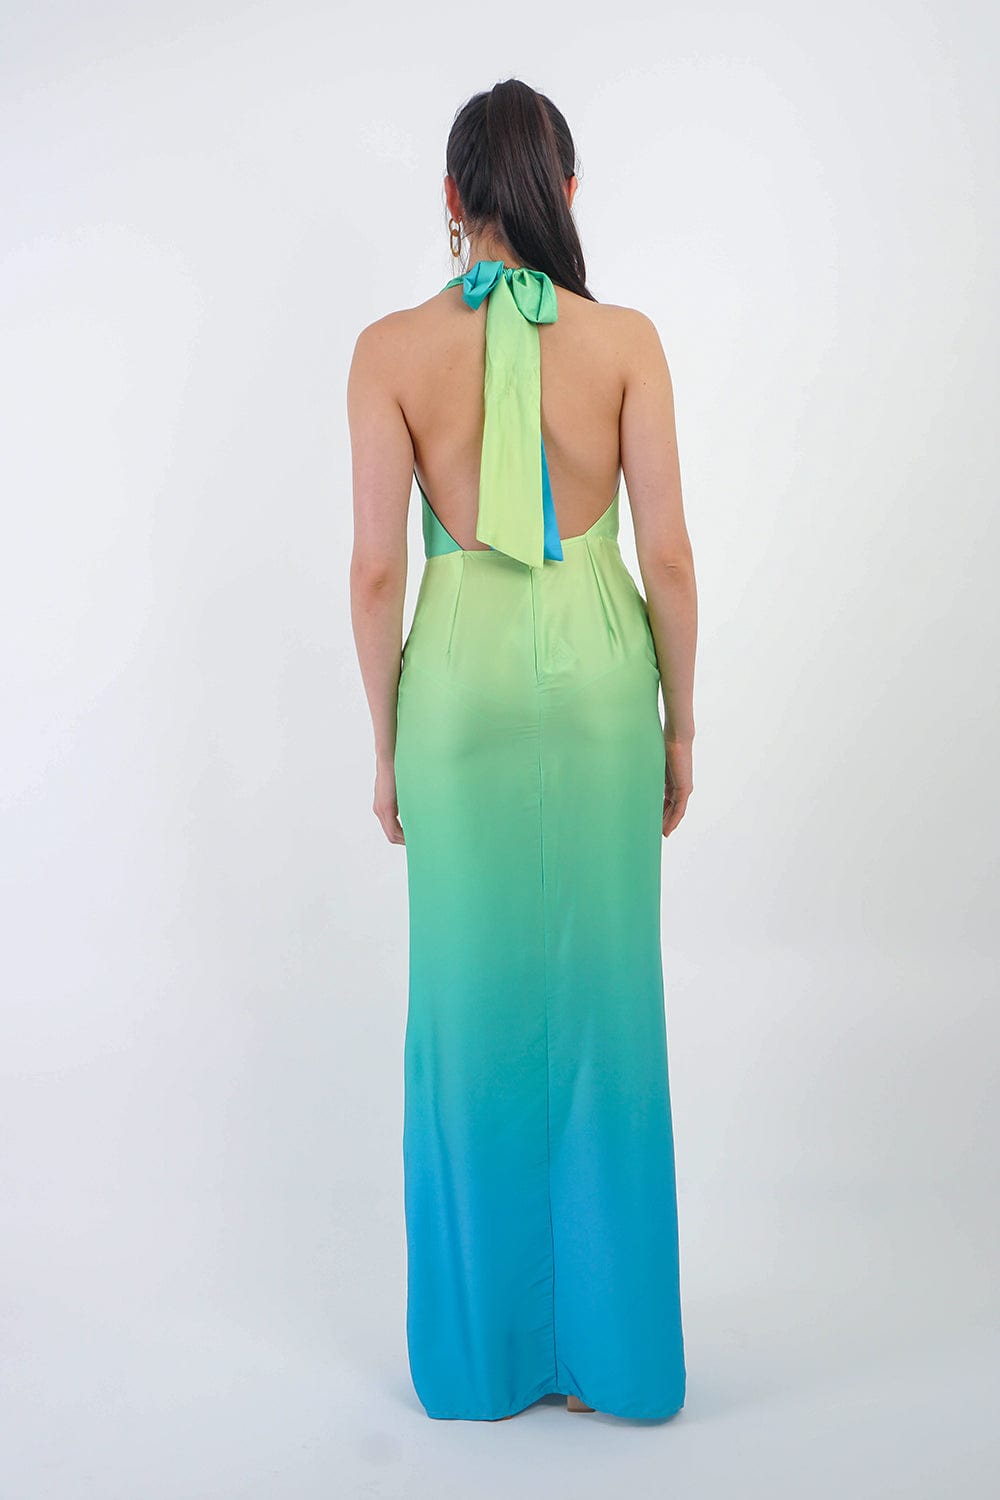 DCD GOWNS Lime Ombre Halter Cowl Gown